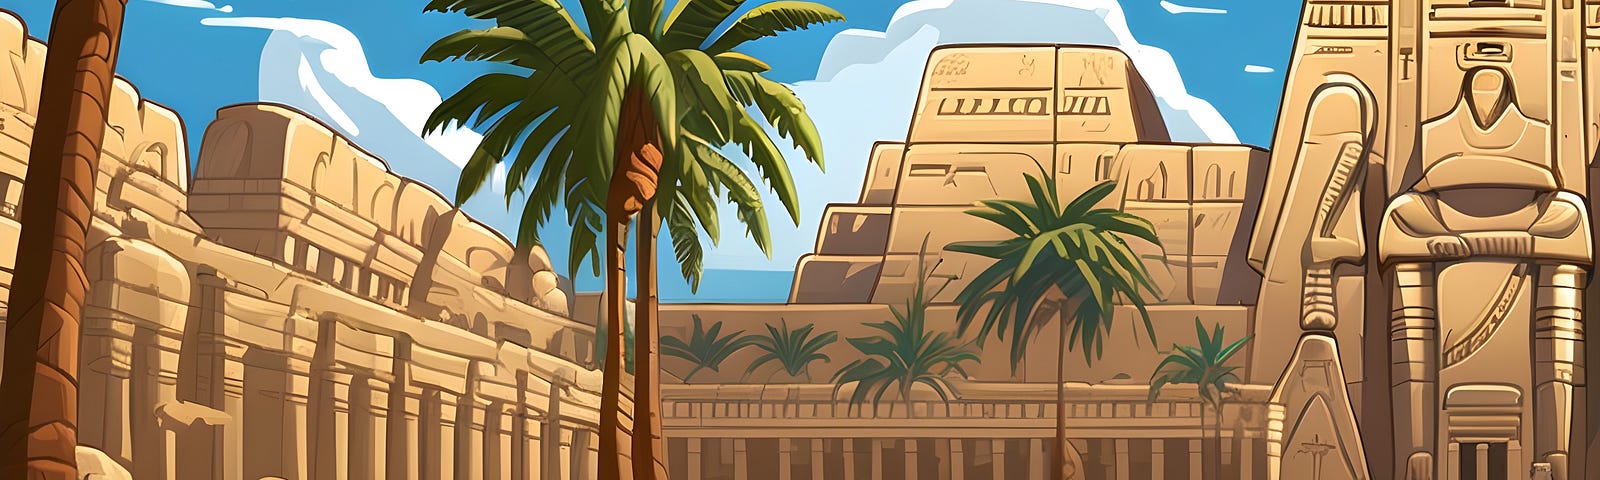 a huge block of sandstone in the middle of a grand plaza in ancient egypt, palm trees and neat rows of warriors